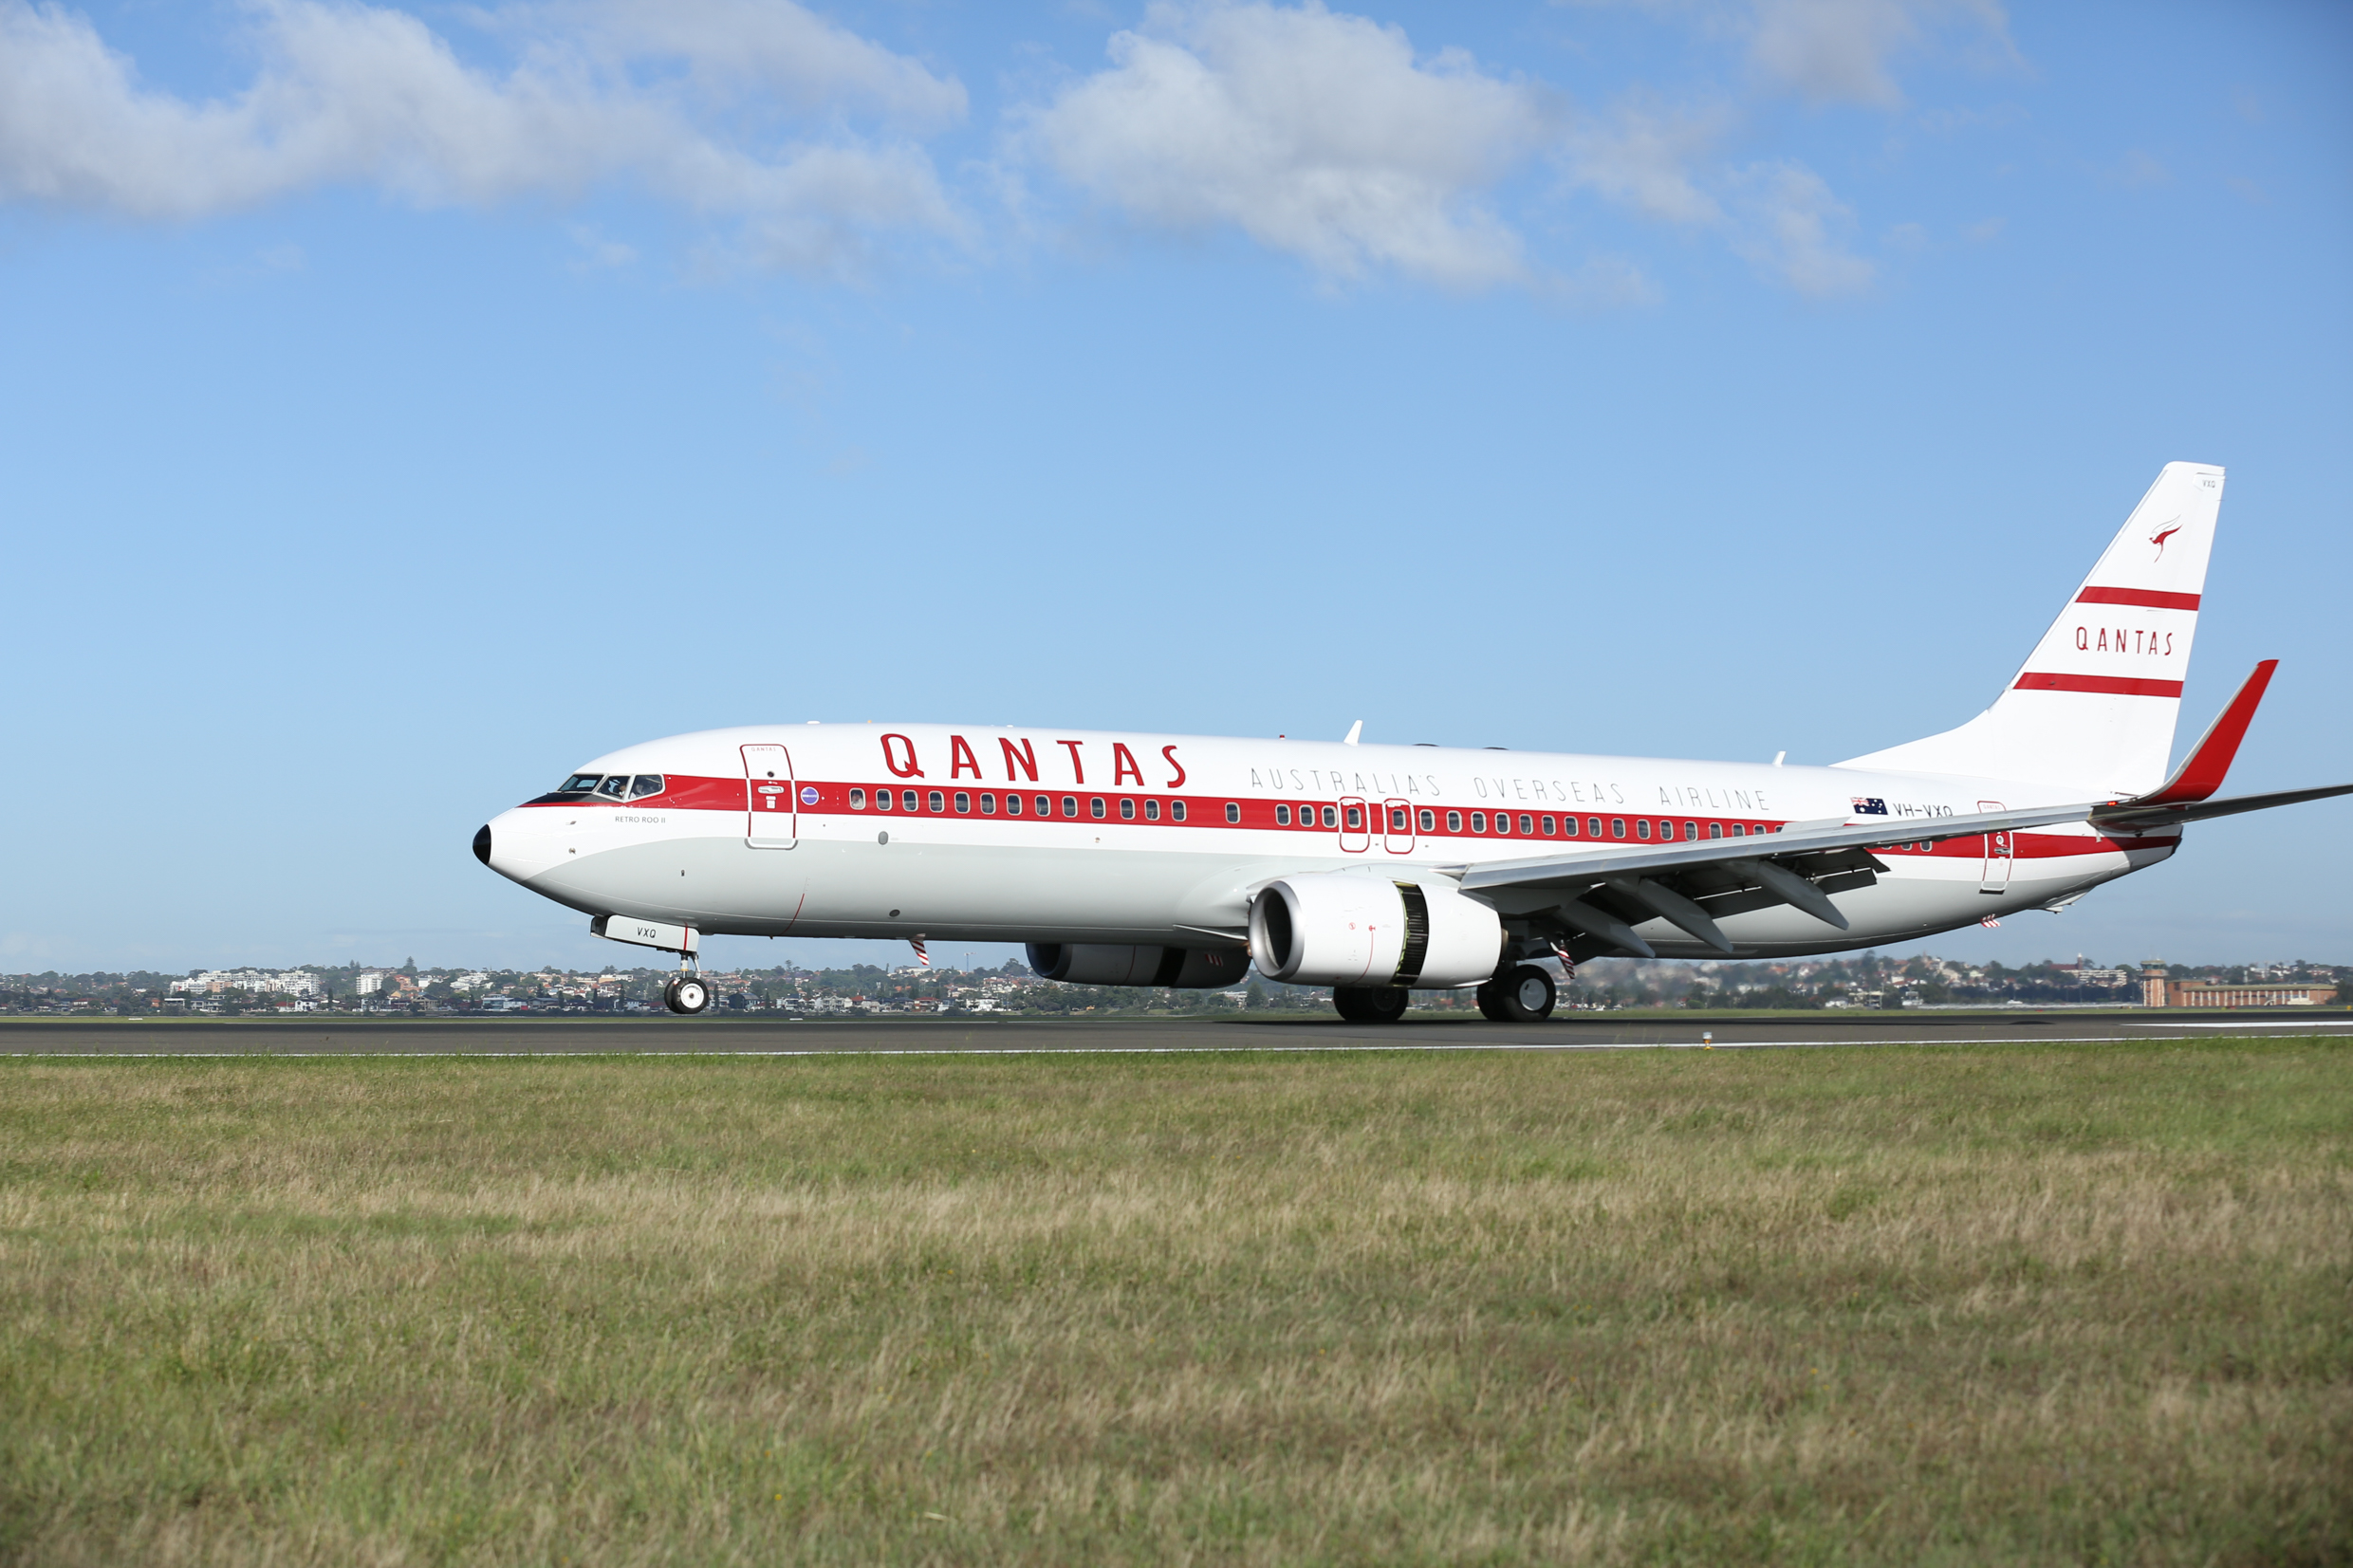 The Complete List of Airliner Retro Liveries in 2020 - Airport 